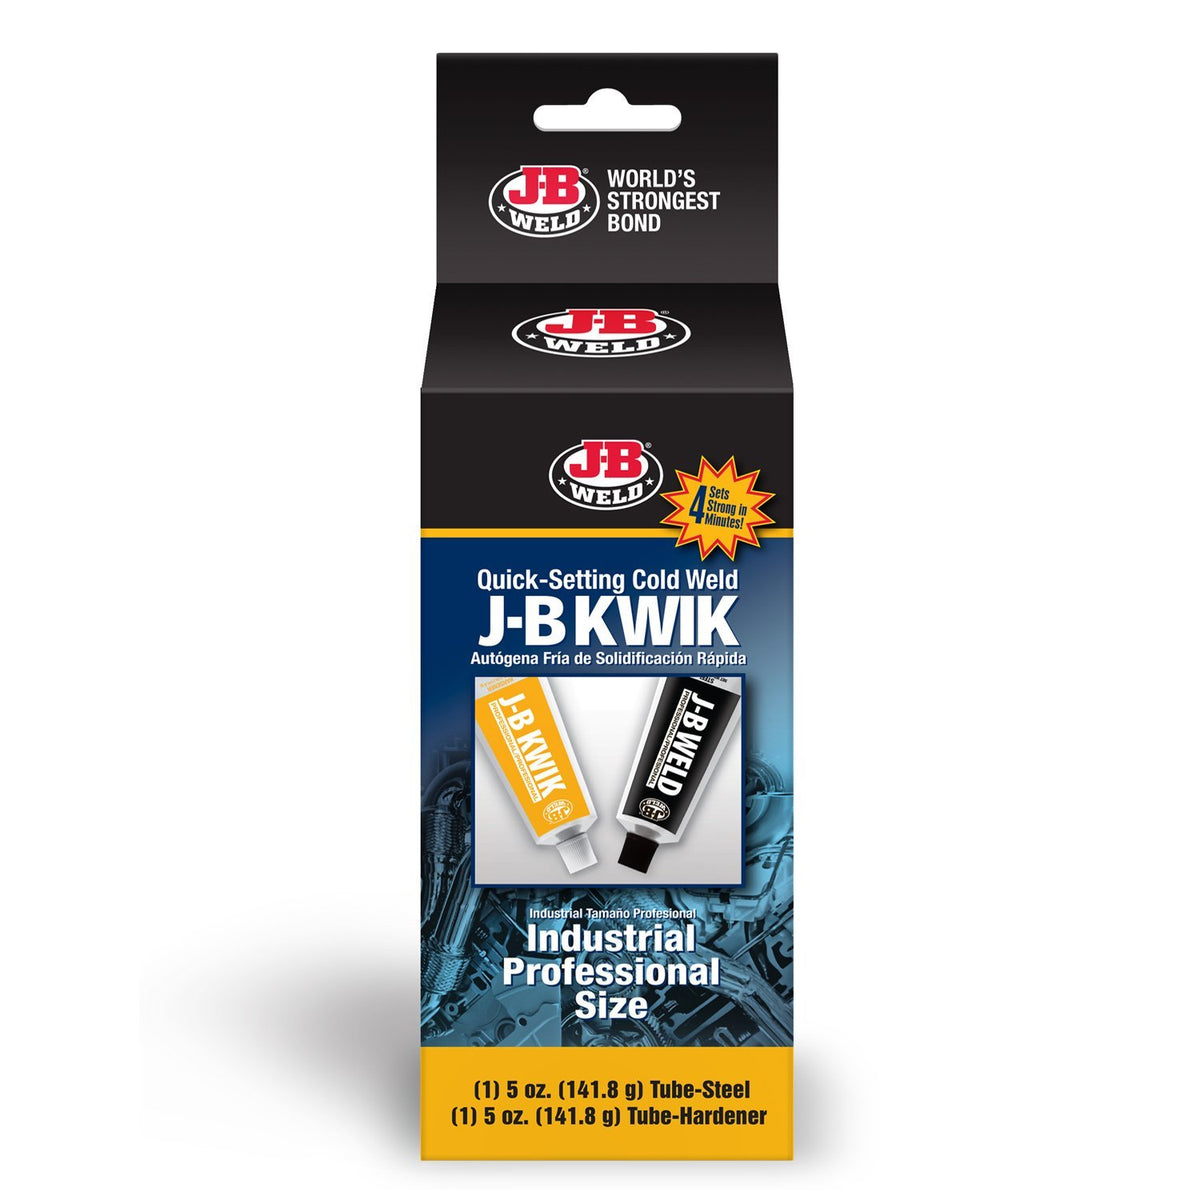 Buy jb weld 8270 - Online store for lubricants, fluids & filters, gasket in USA, on sale, low price, discount deals, coupon code